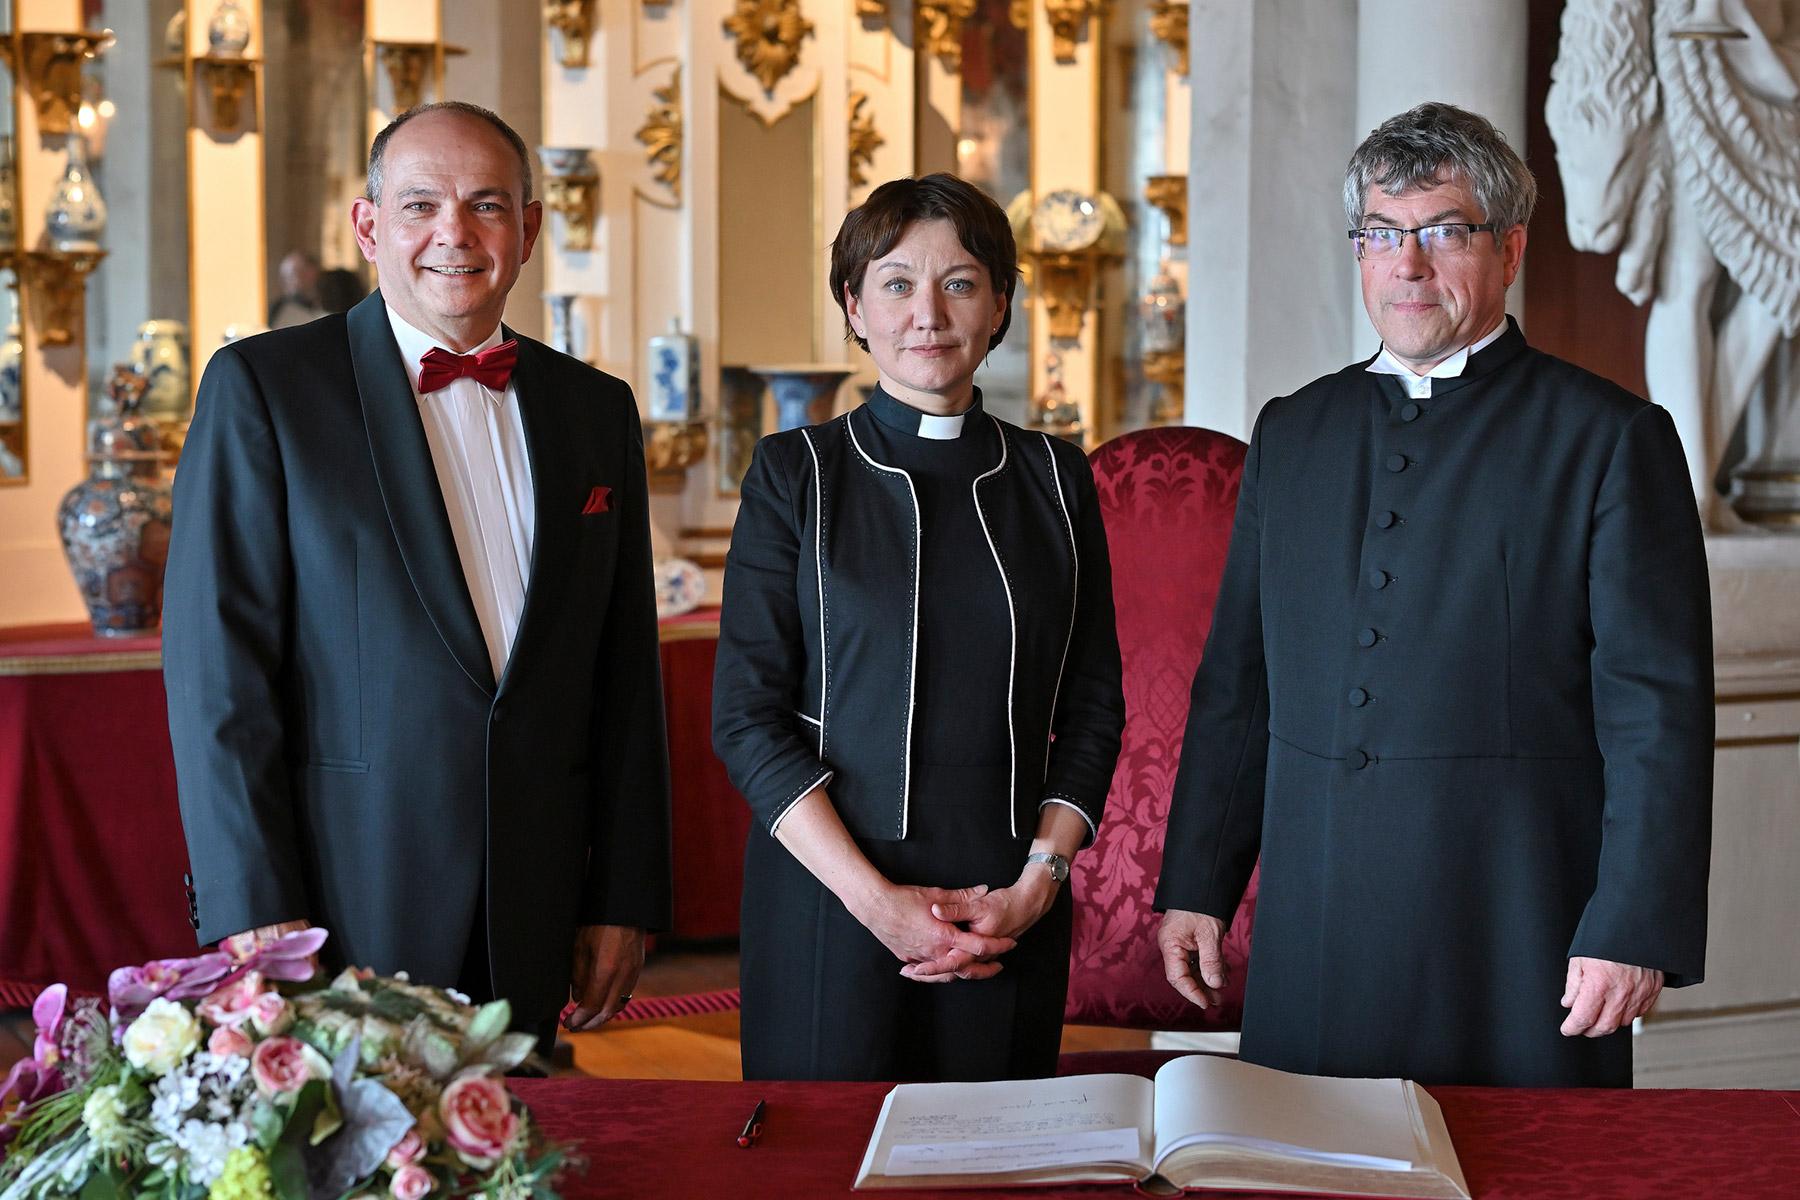 From left: Lord Mayor of Gotha, Knut Kreuch, LWF General Secretary Anne Burghardt and Leading Bishop of the Evangelical Church in Central Germany Friedrich Kramer on the occasion of the award of 